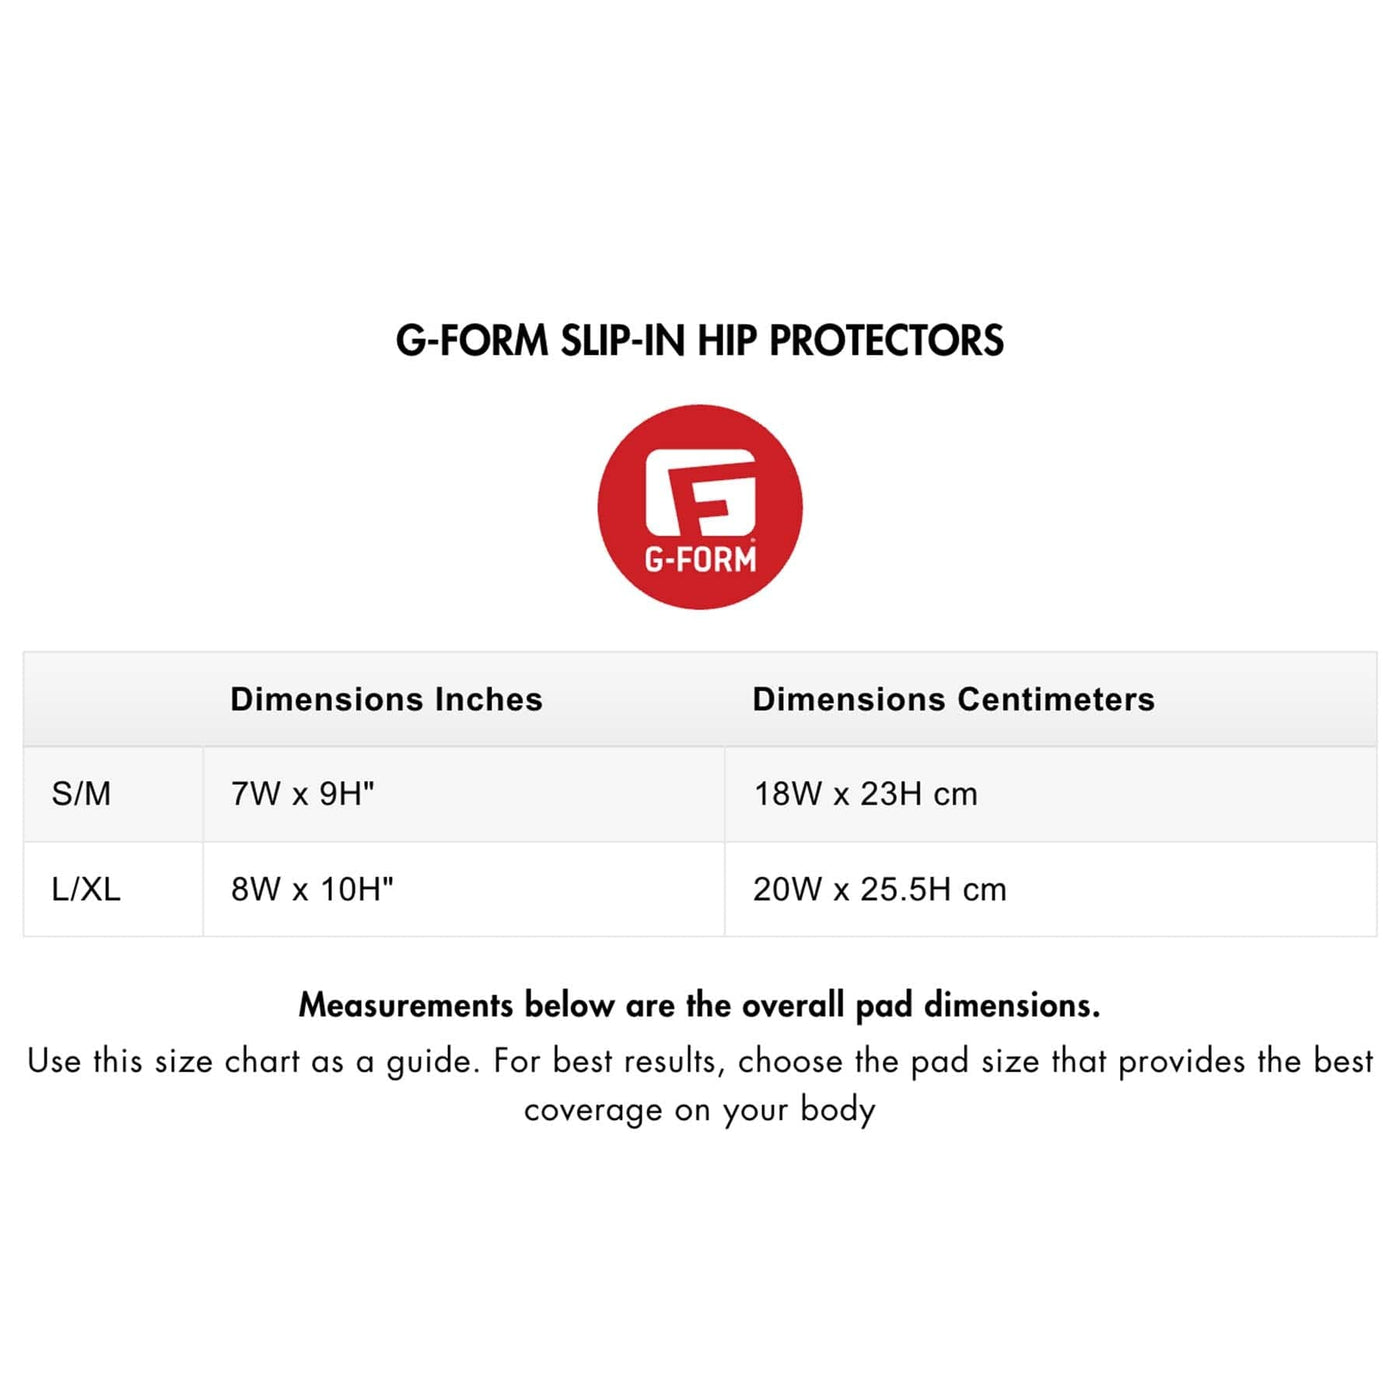 G-FORM SLIP-IN HIP PROTECTORS SIZE CHART